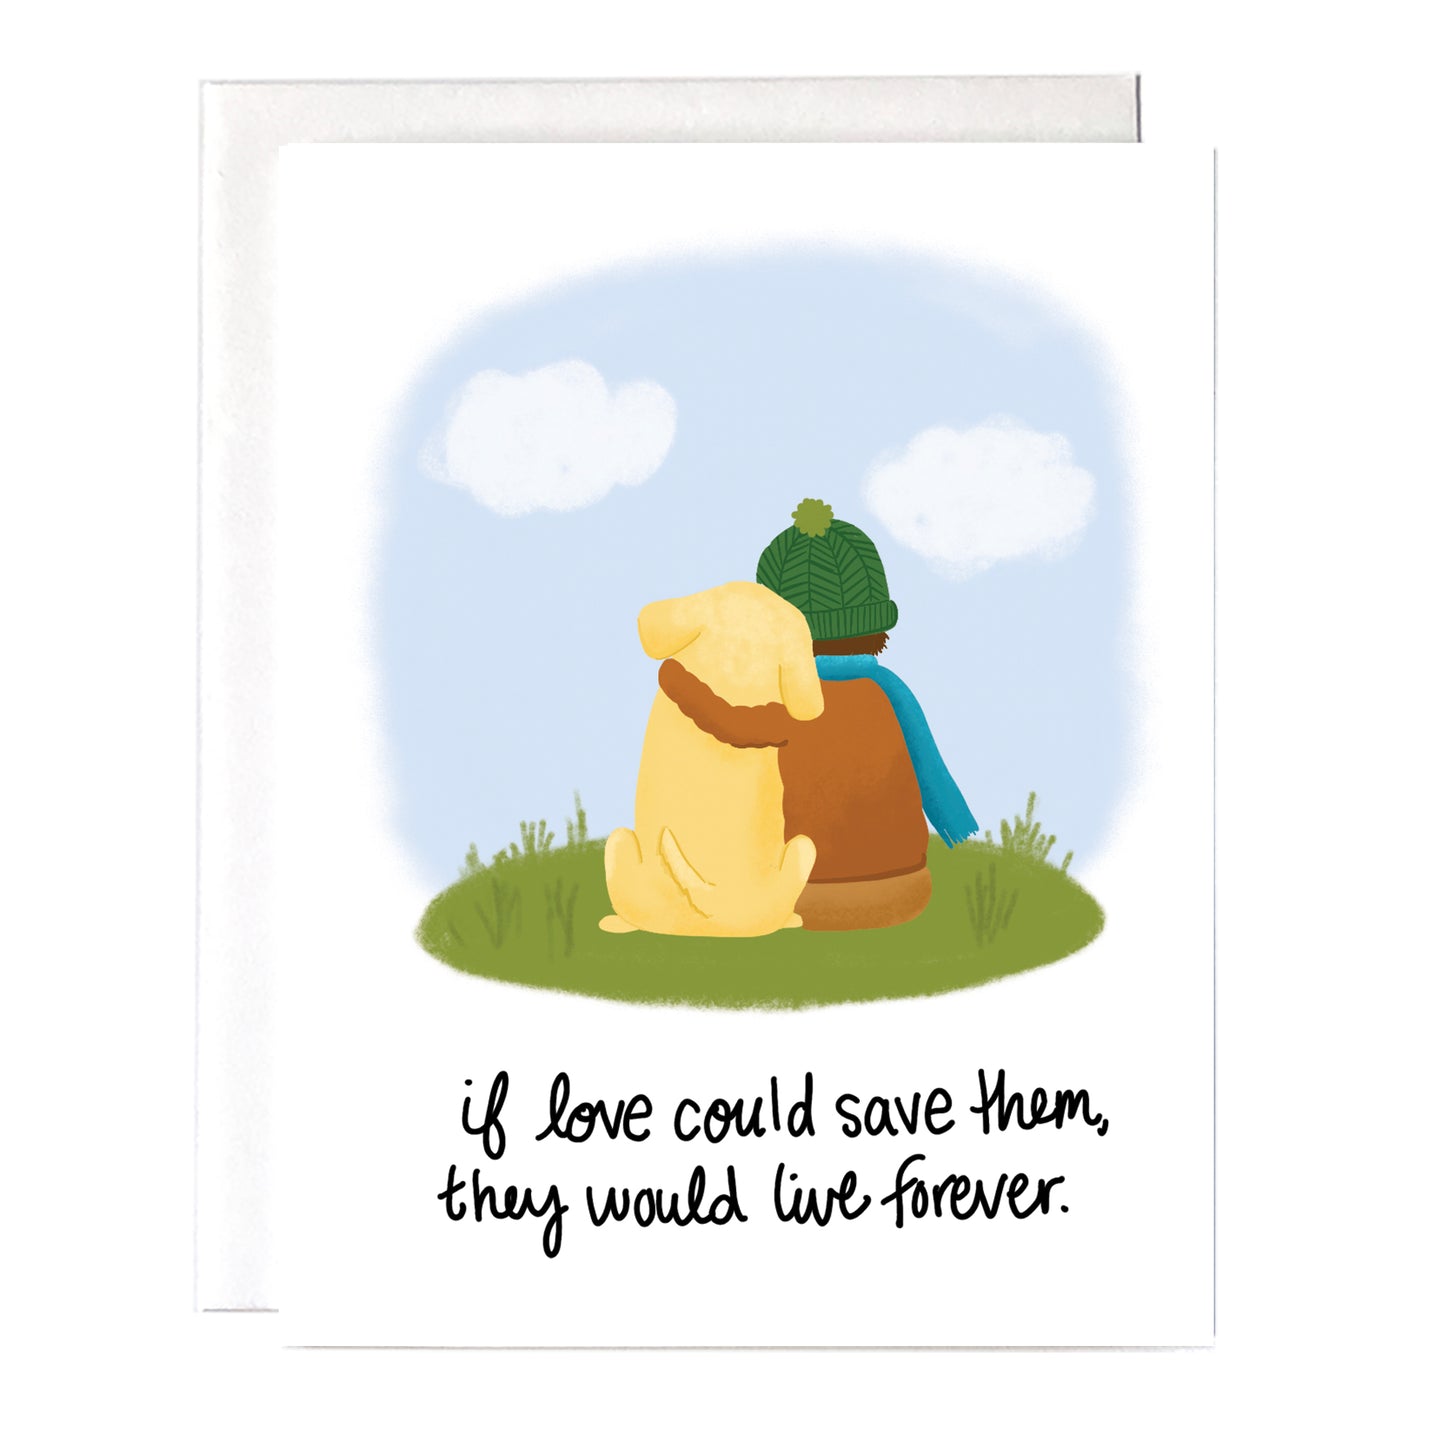 Send this dog sympathy card to share some love to someone who lost their beloved dog. Size A2 greeting card (4.25" x 5.5") with envelope, blank Inside. All cards are designed and Illustrated with love by me, Anna Fox, and are printed at my friendly neighborhood print shop in Denver, CO.